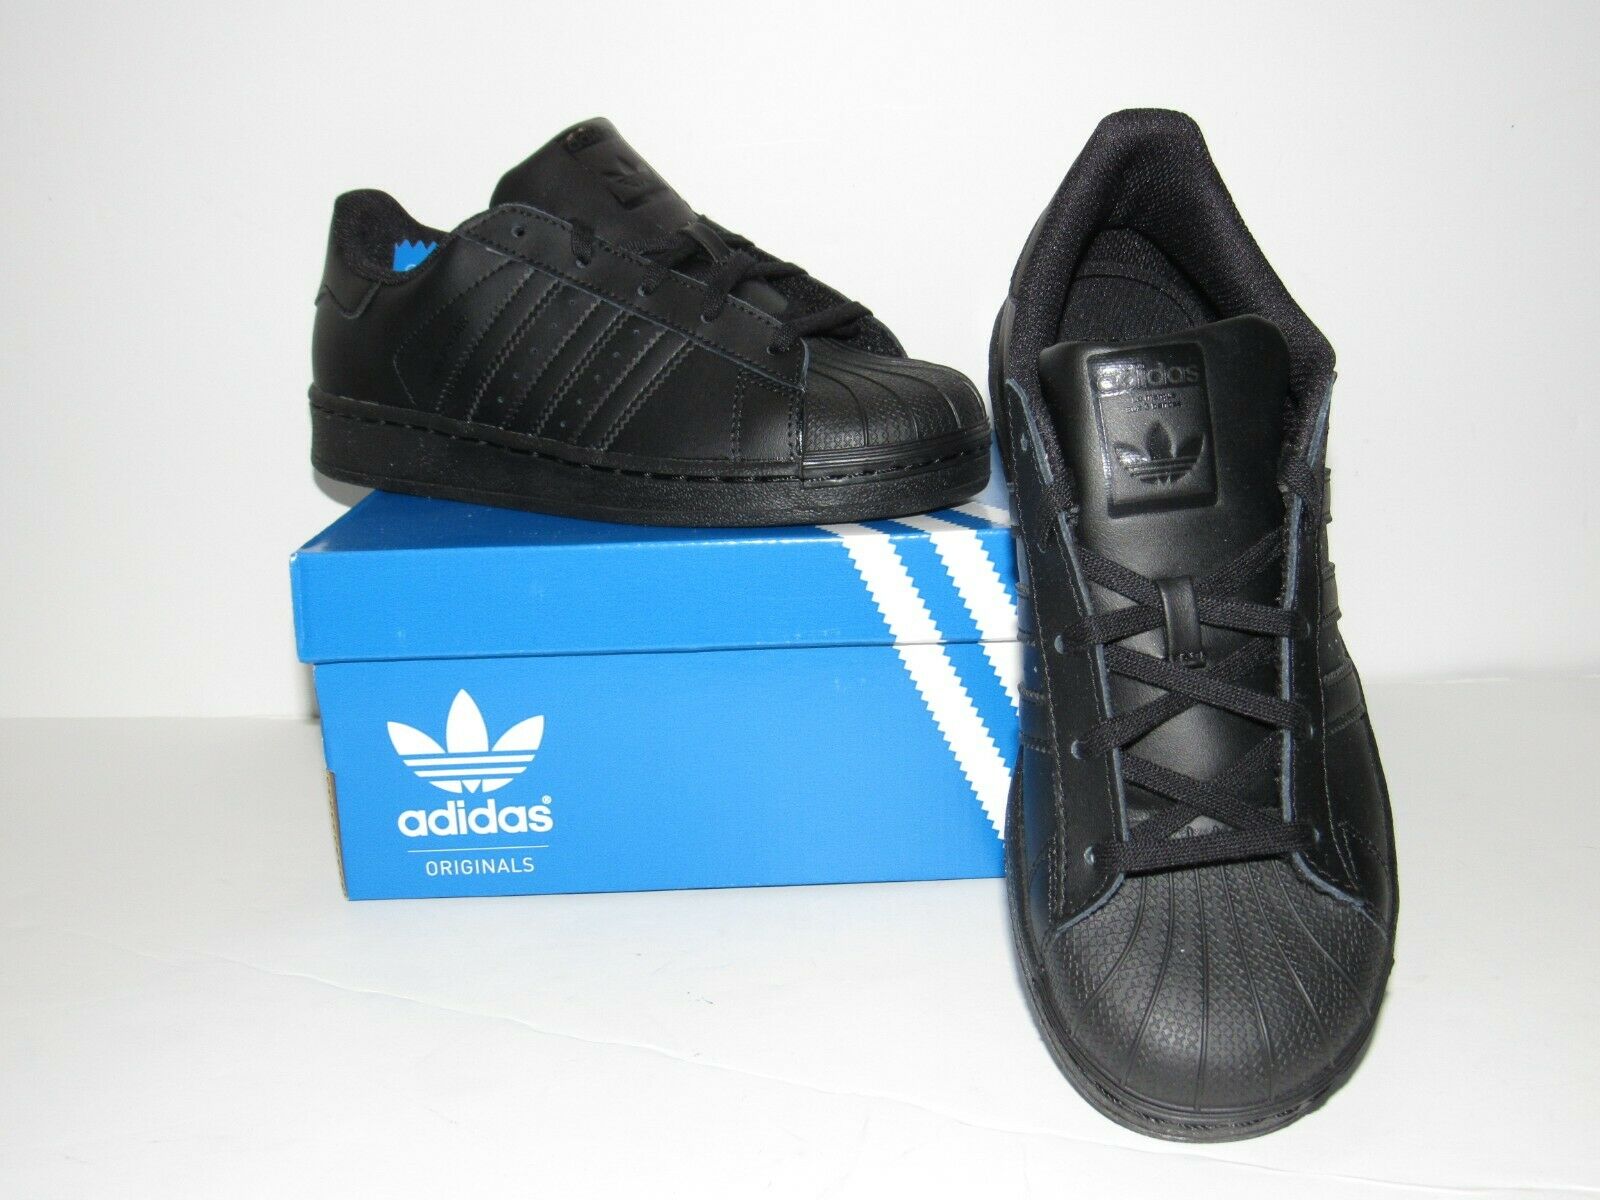 adidas Originals Superstar Black LEATHER Athletic Shoes Youth Kids' size 3